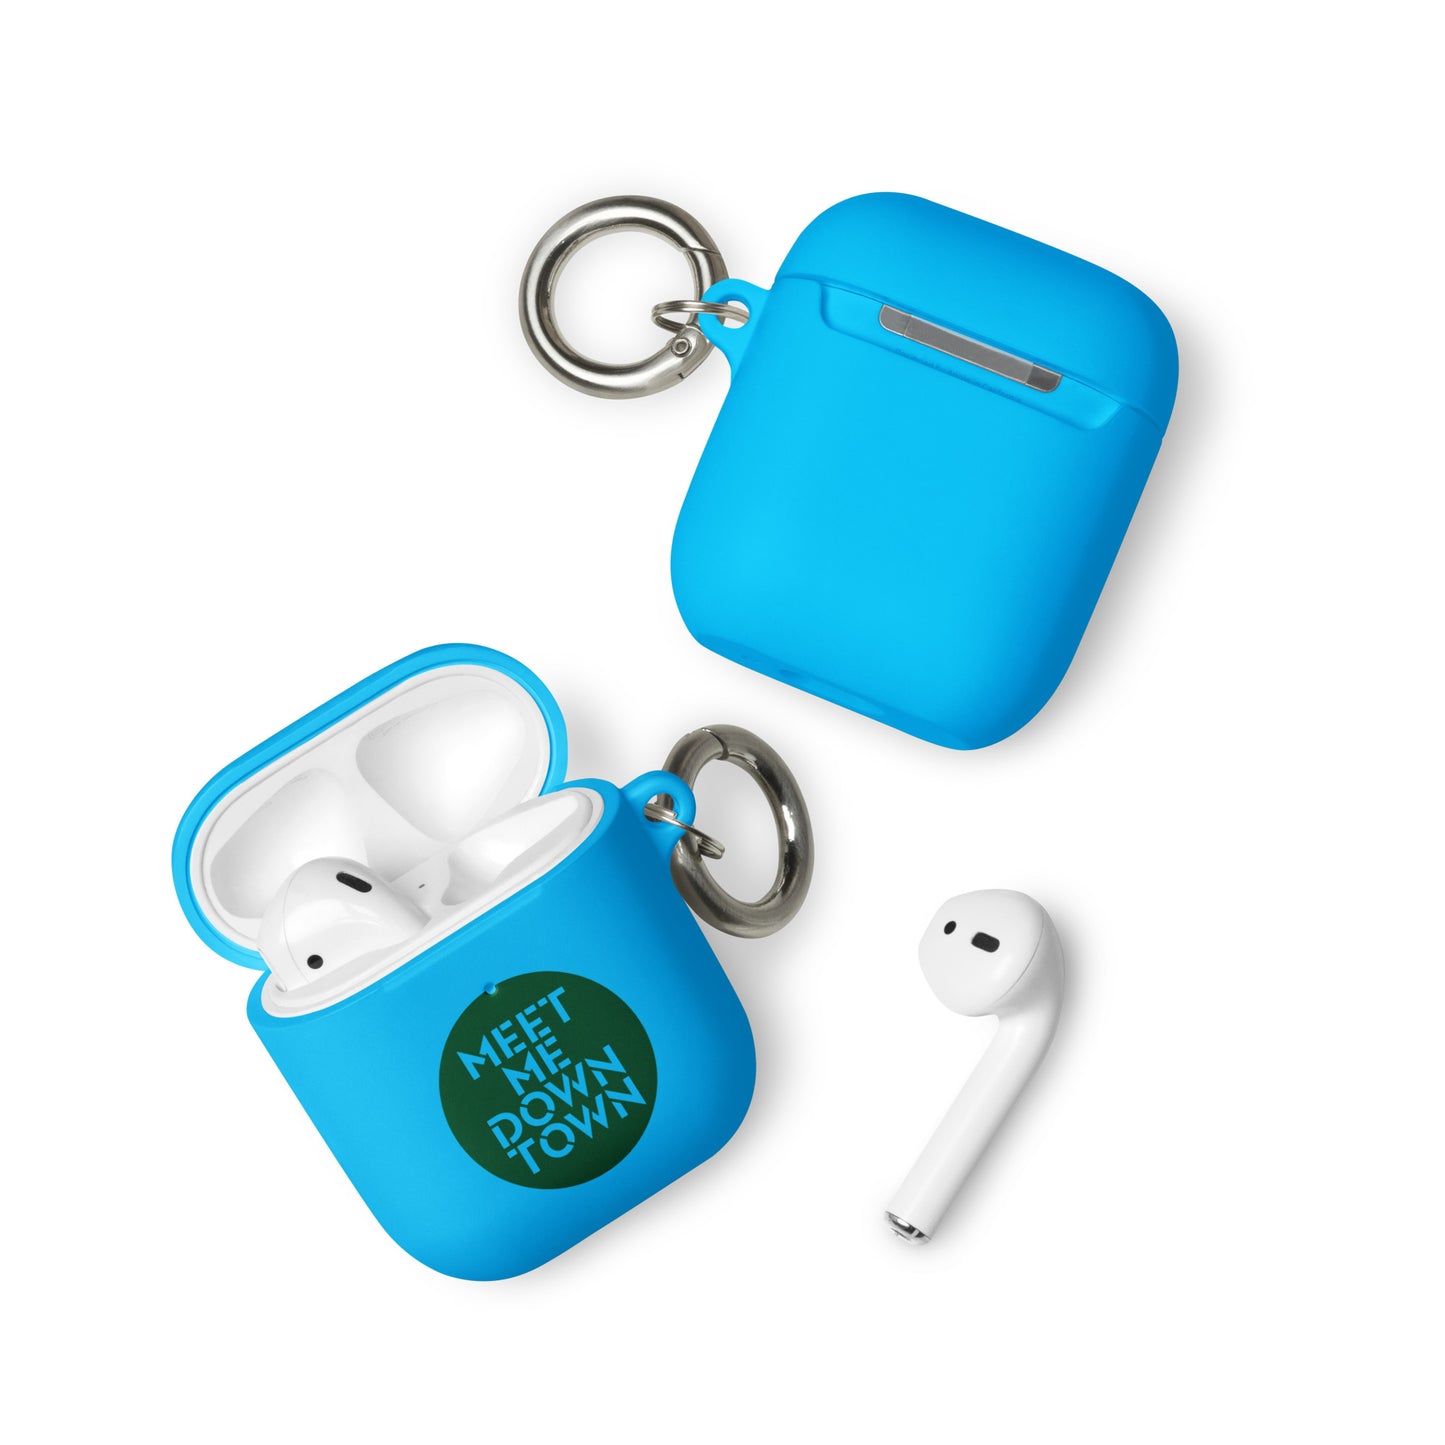 "Meet Me Downtown" (Green) Rubber Case for AirPods®